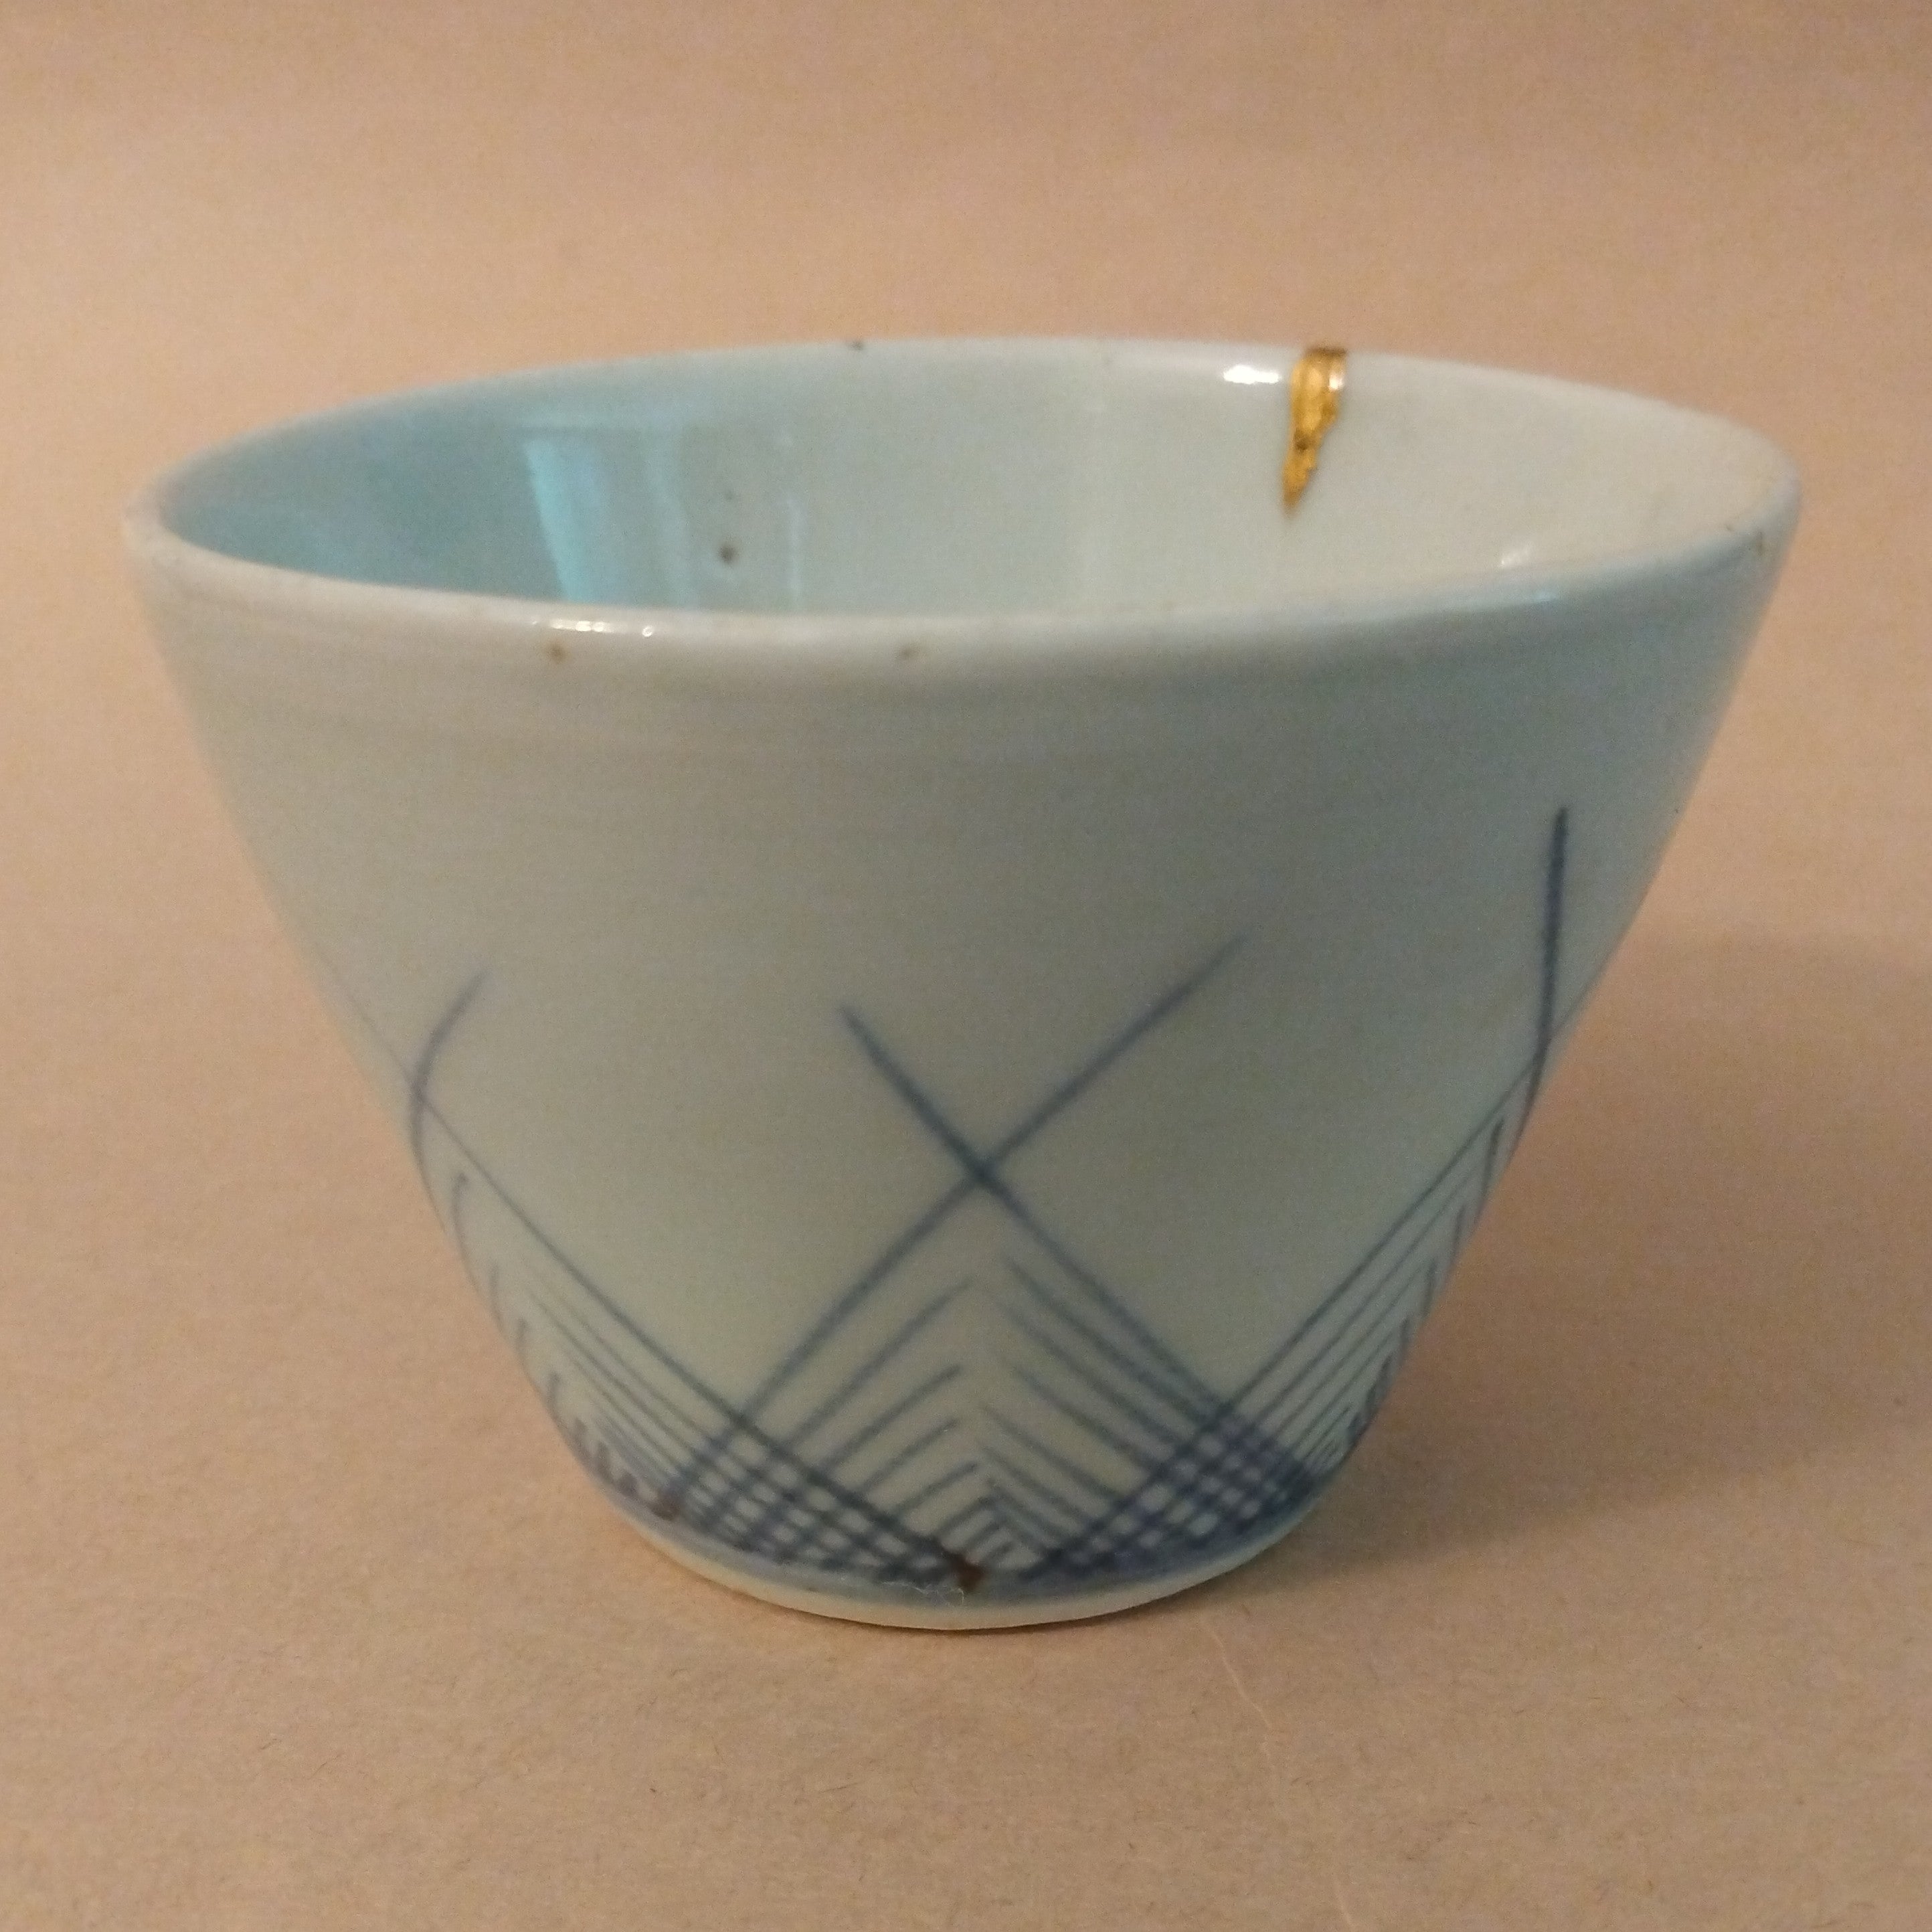 Imari Ware Soba Choko (Soba Noodle Dipping Cup) from the Mid-Late Edo period (1600-1868)